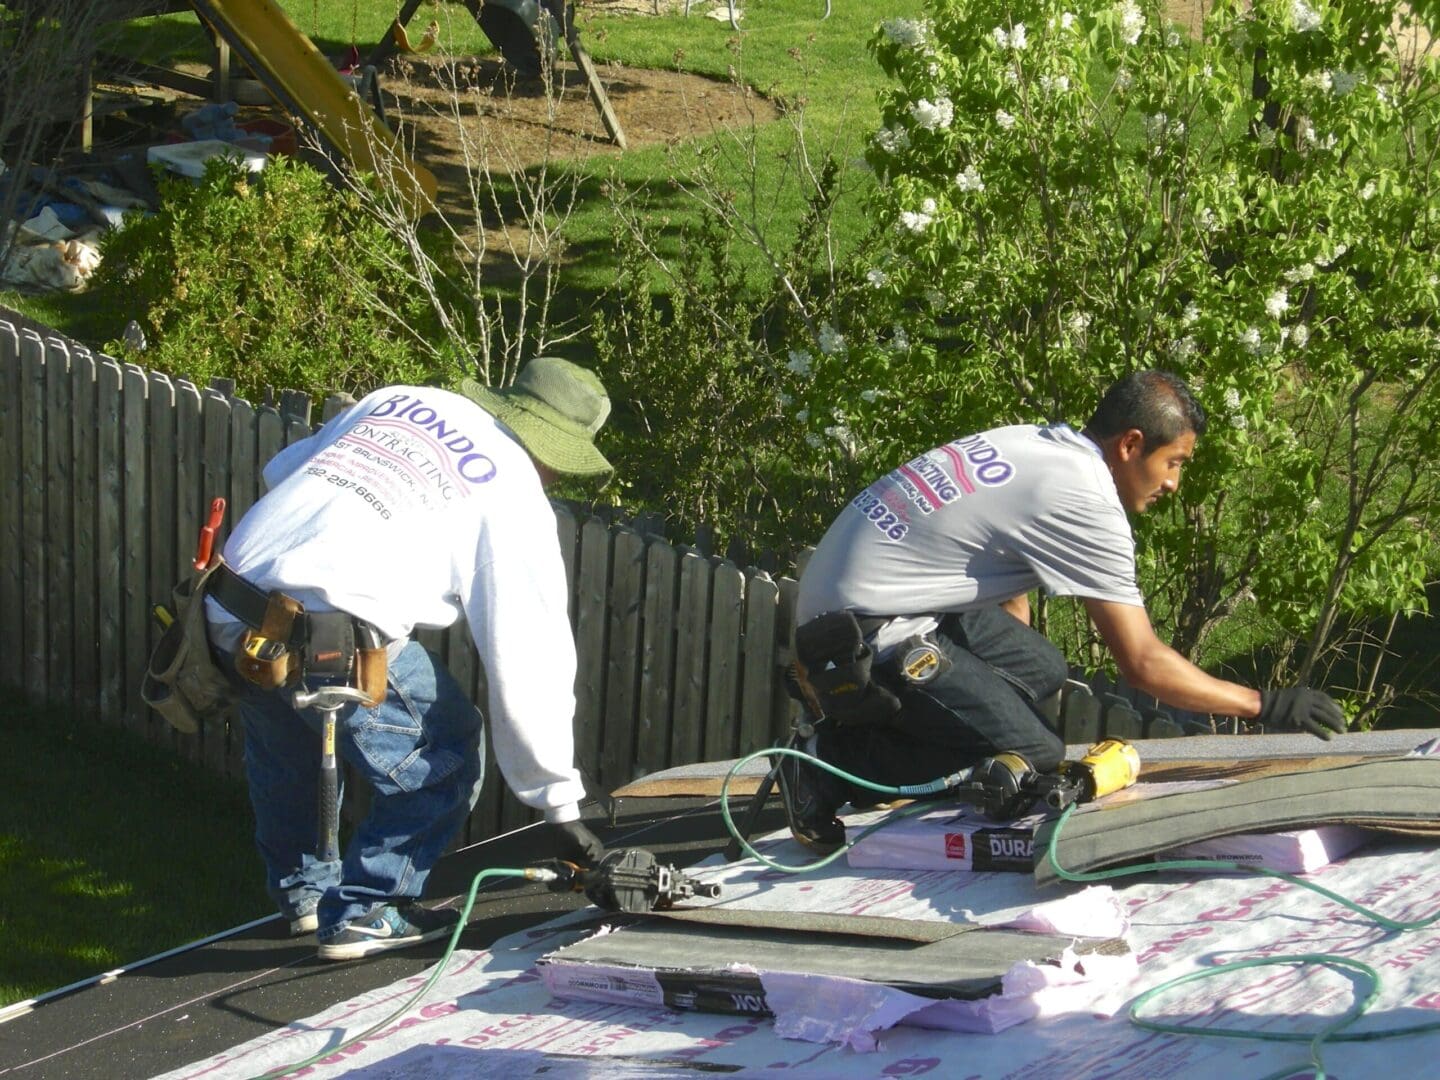 Two men working on a roof in the yard.